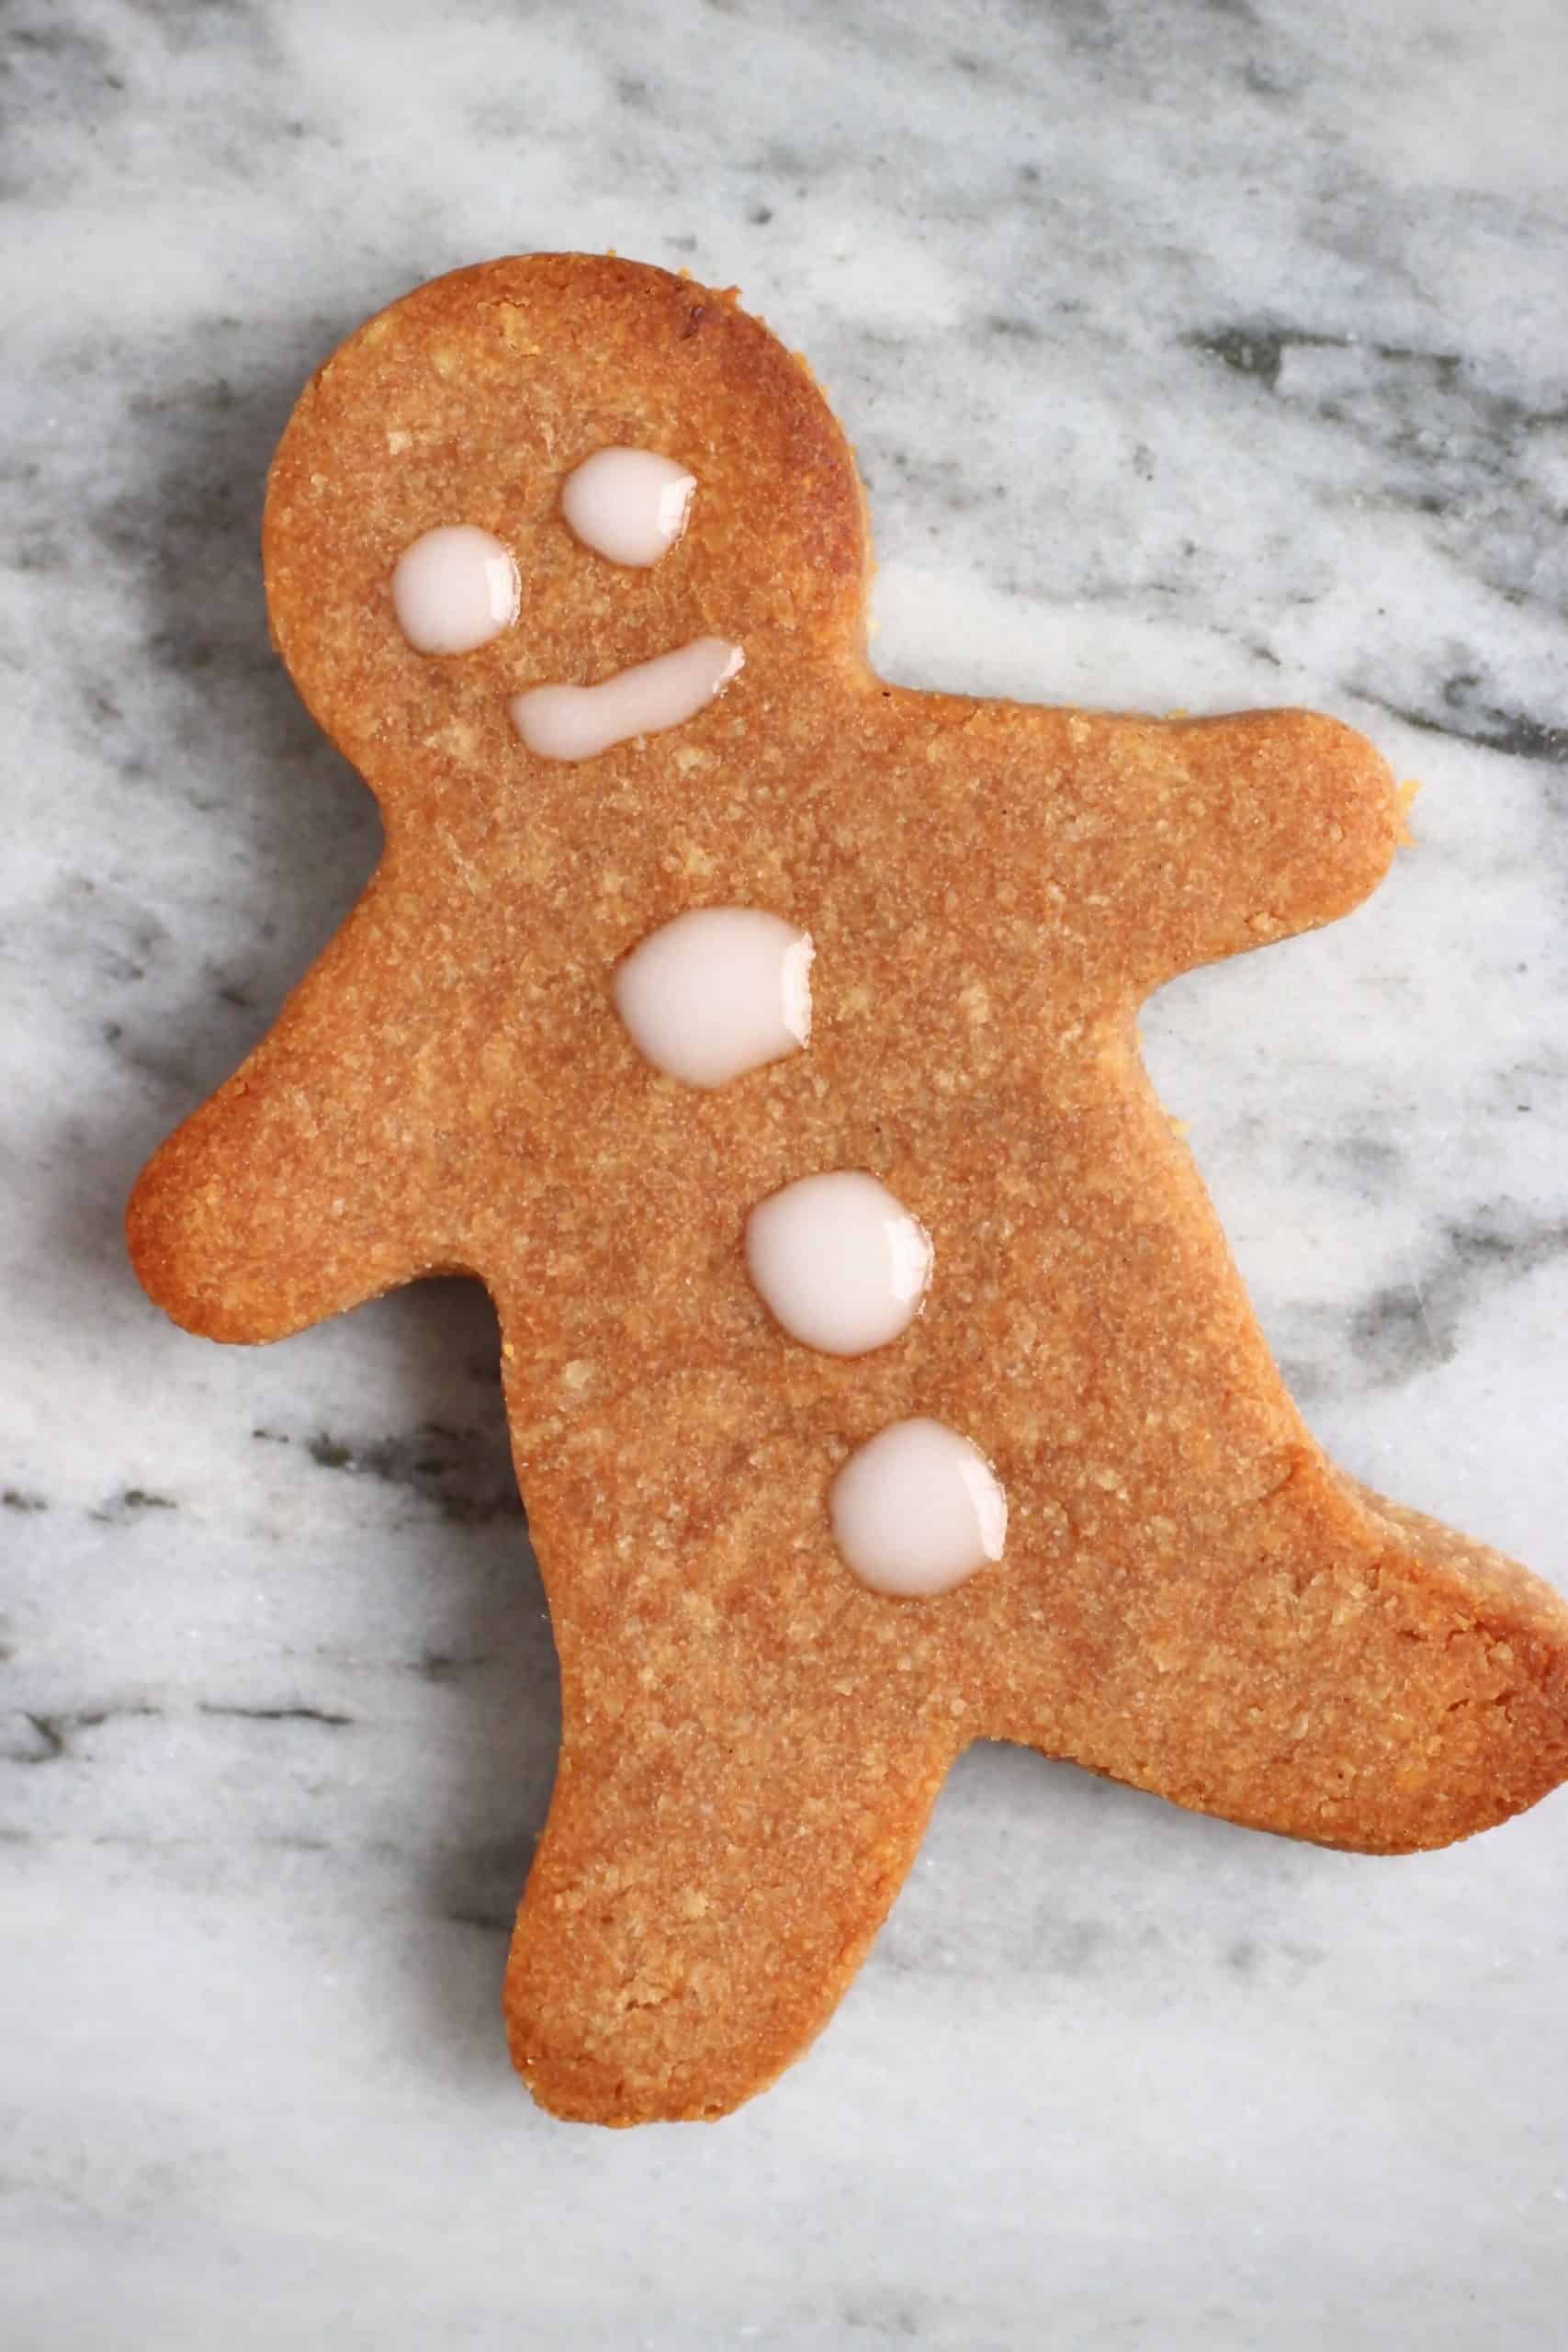 A gingerbread man cookie on a marble background